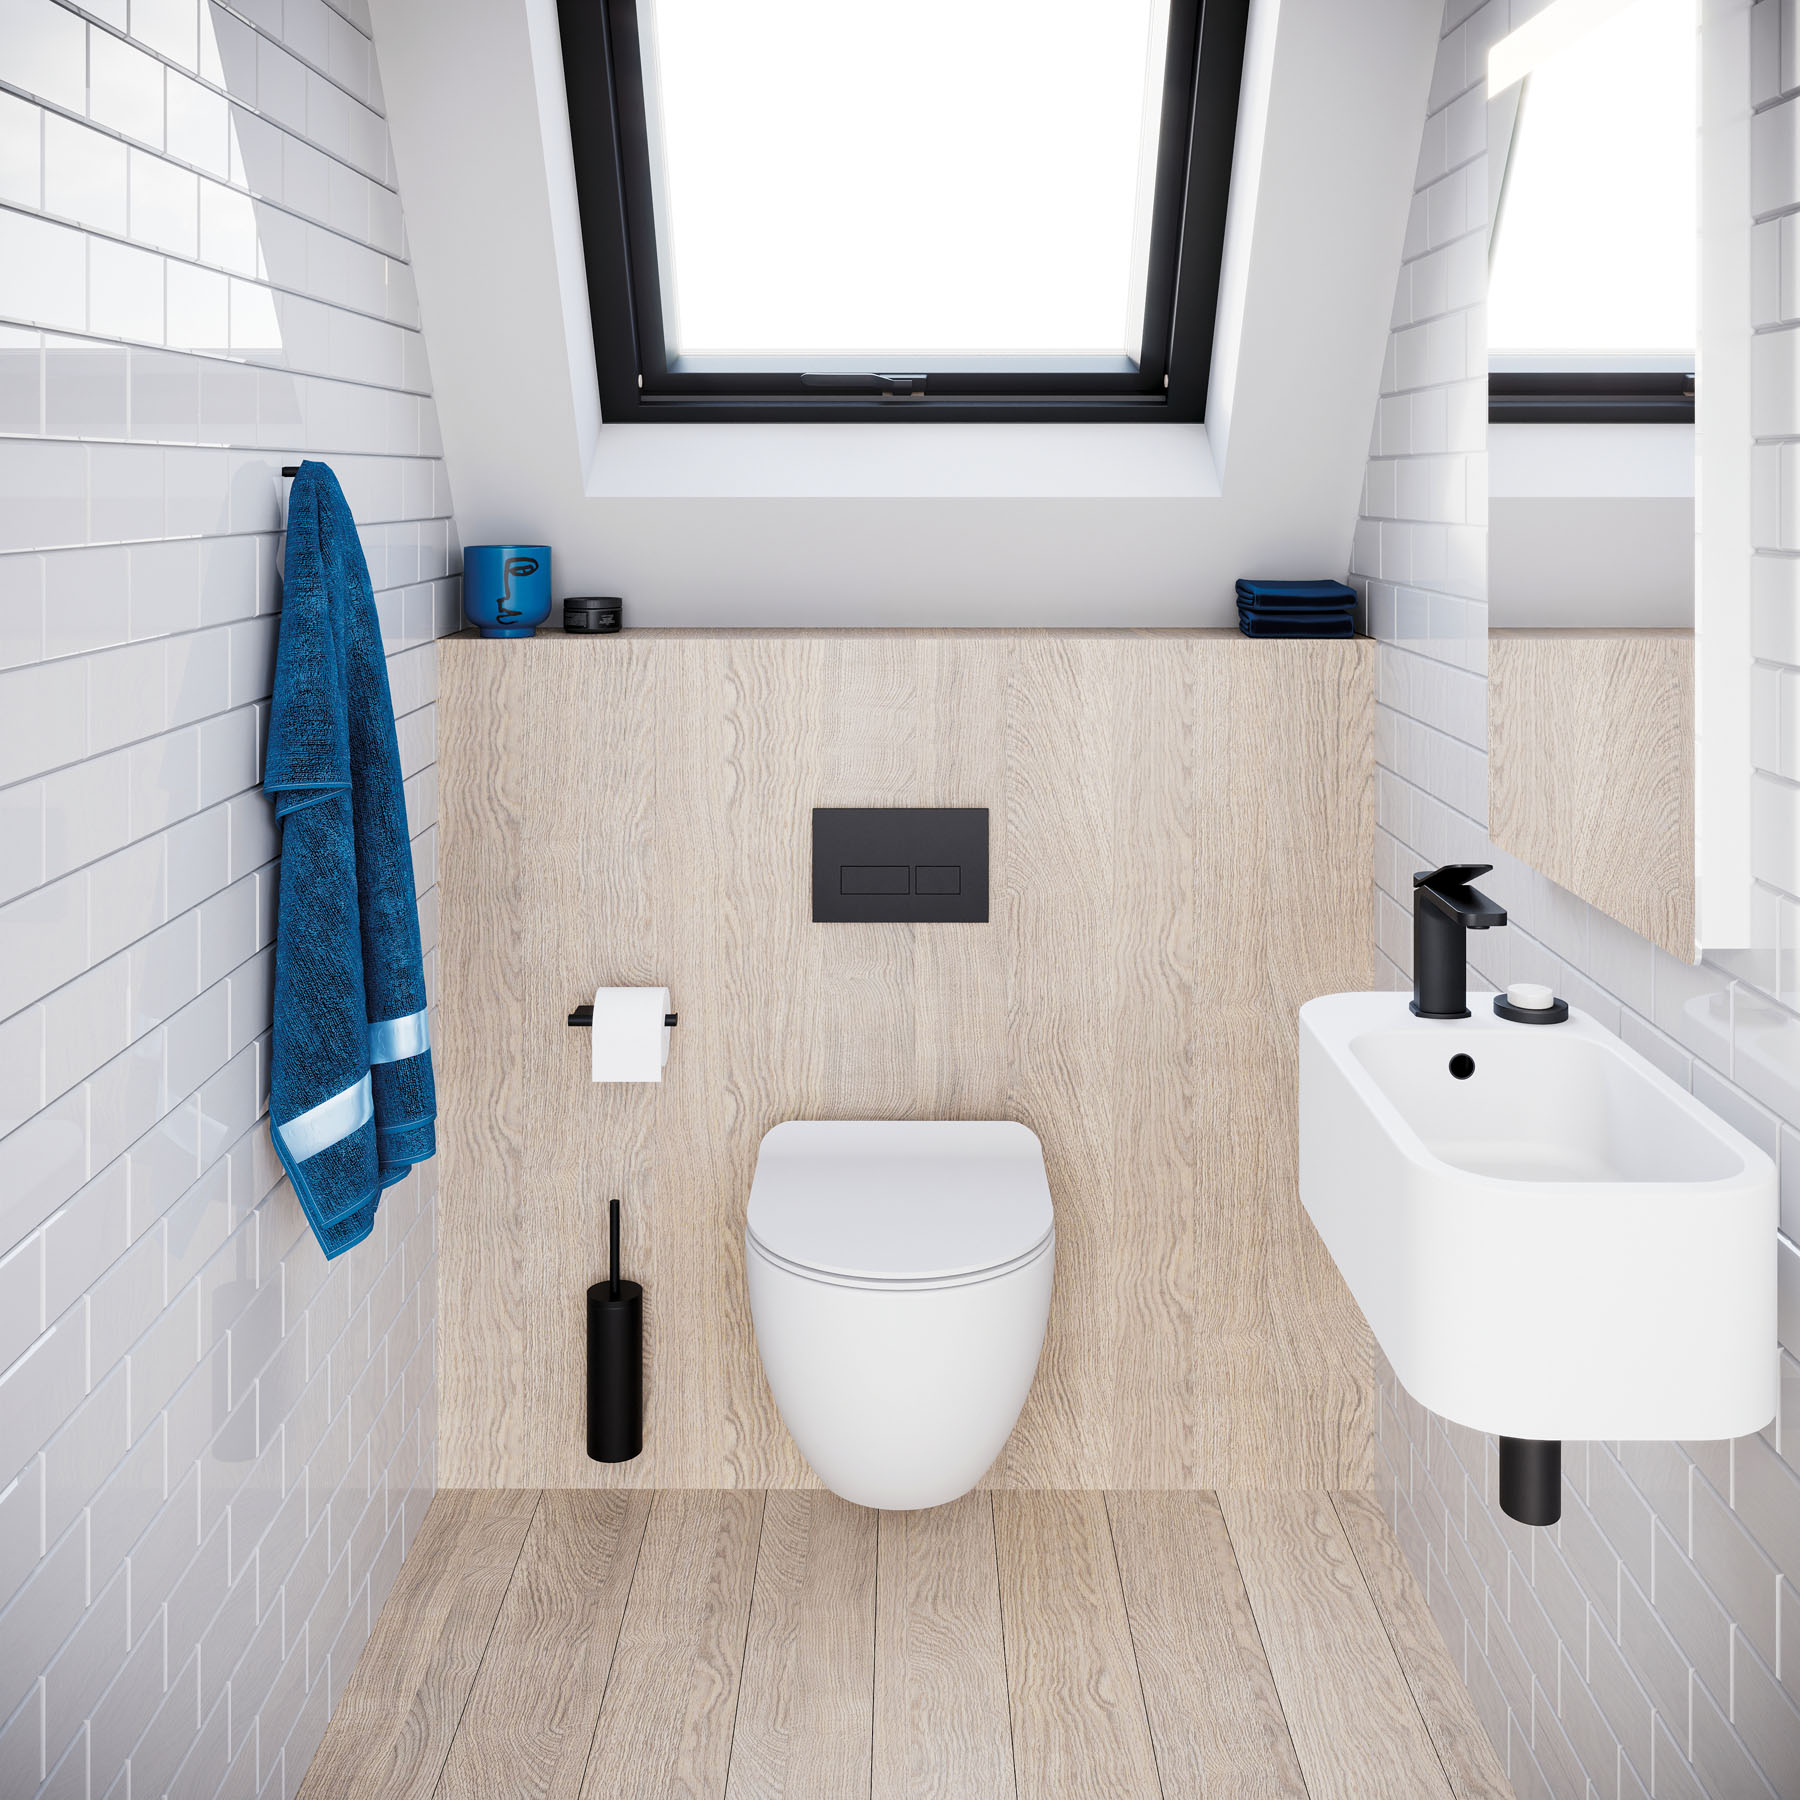 Product Lifestyle image of the Crosswater Popolo Bathroom Set in an attic bathroom with Matt Black MPRO Basin Taps